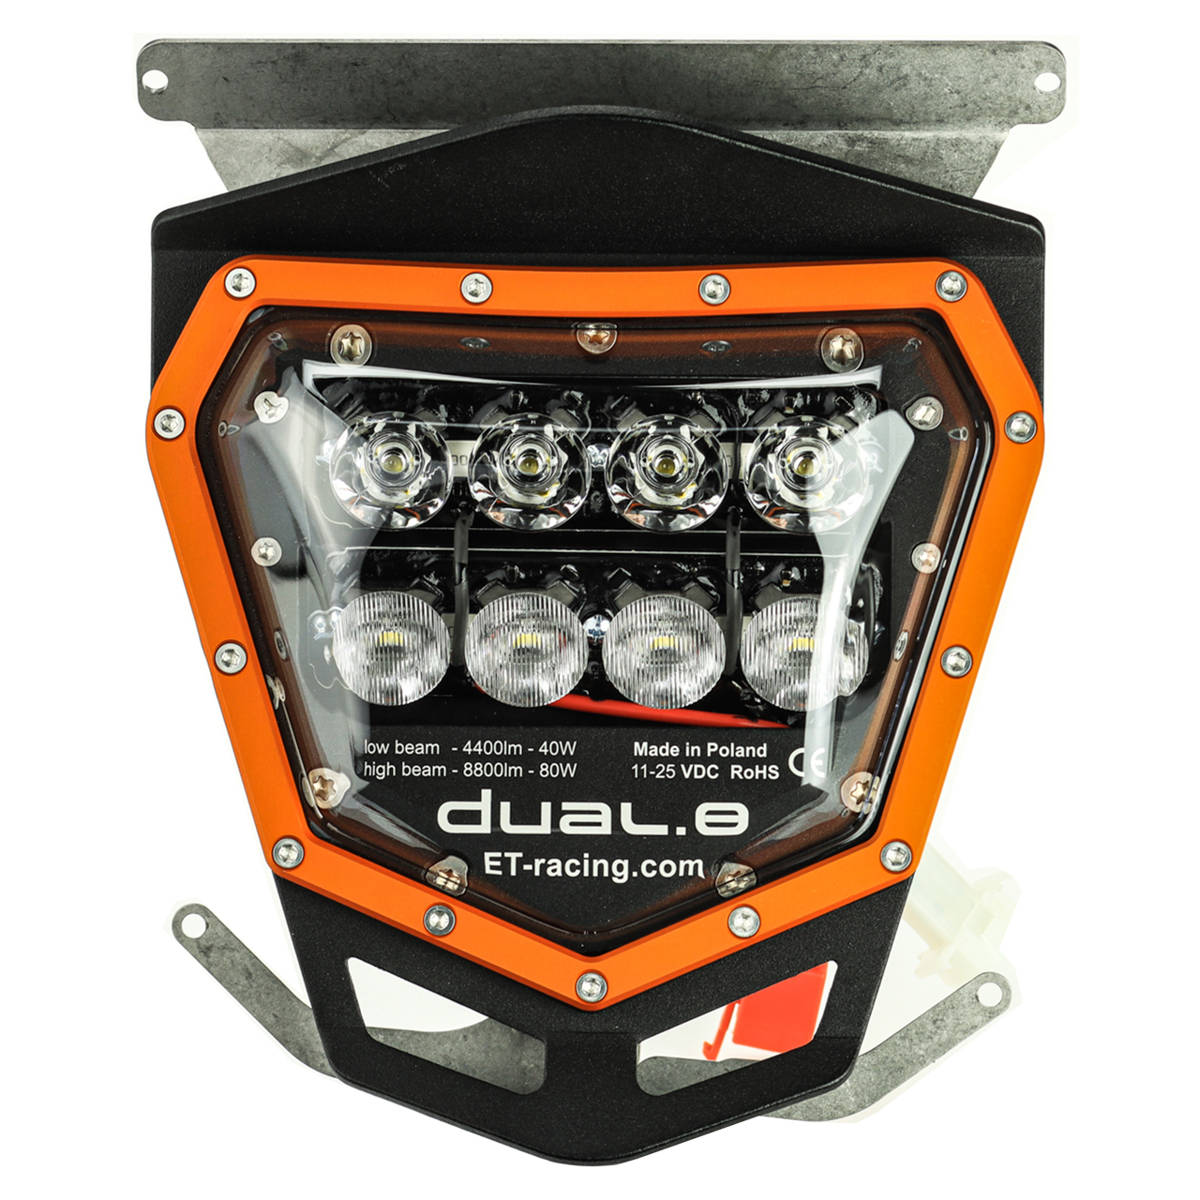 【KTM】LED lamp Headlight Dual.8 KTM 690 2012-2016 only FUEL INJECTION engine